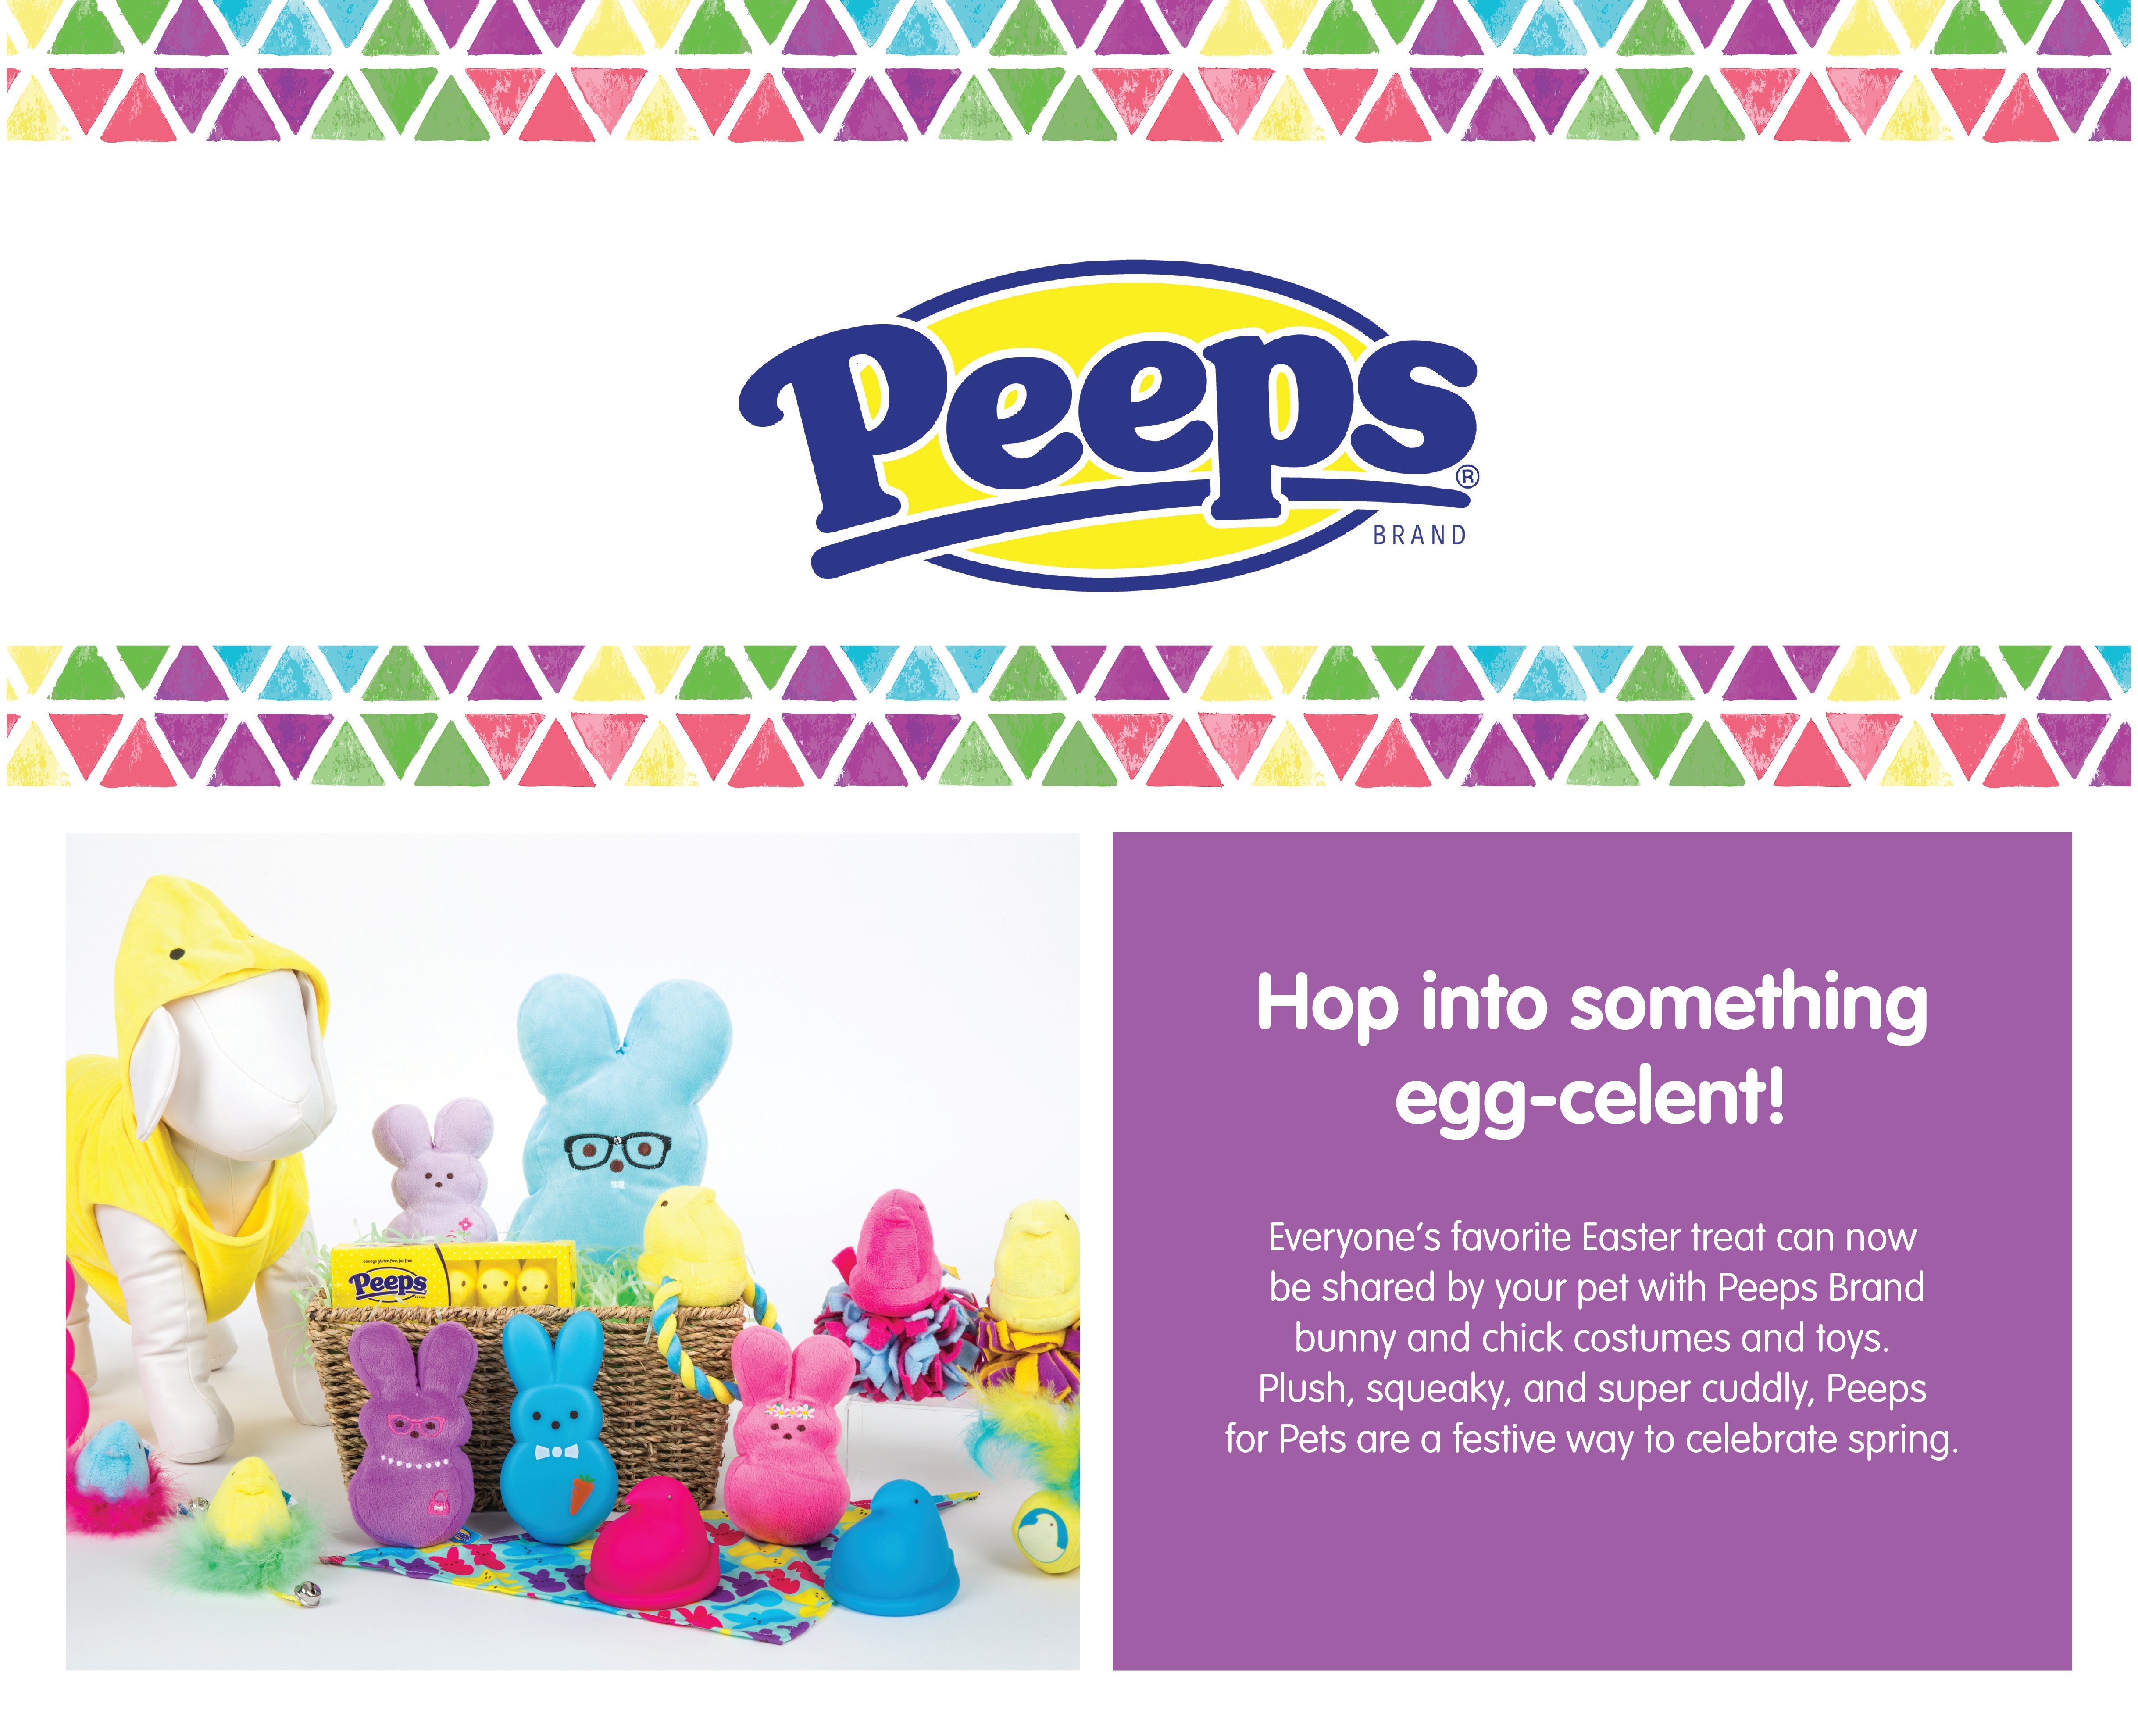 Peeps for Pets